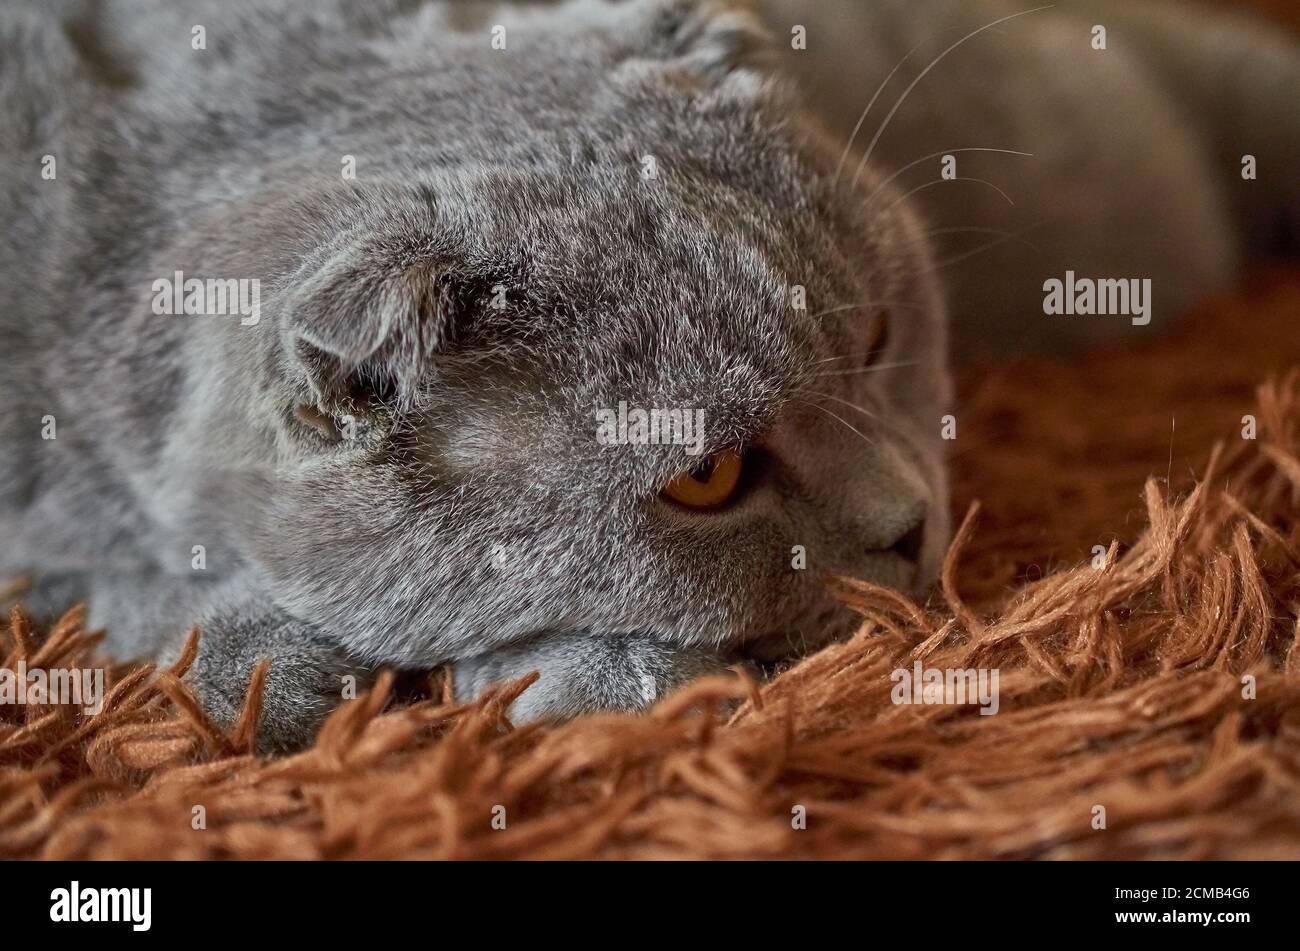 A Scottish fold cat sleeps on a brown fluffy blanket. Close up Stock Photo